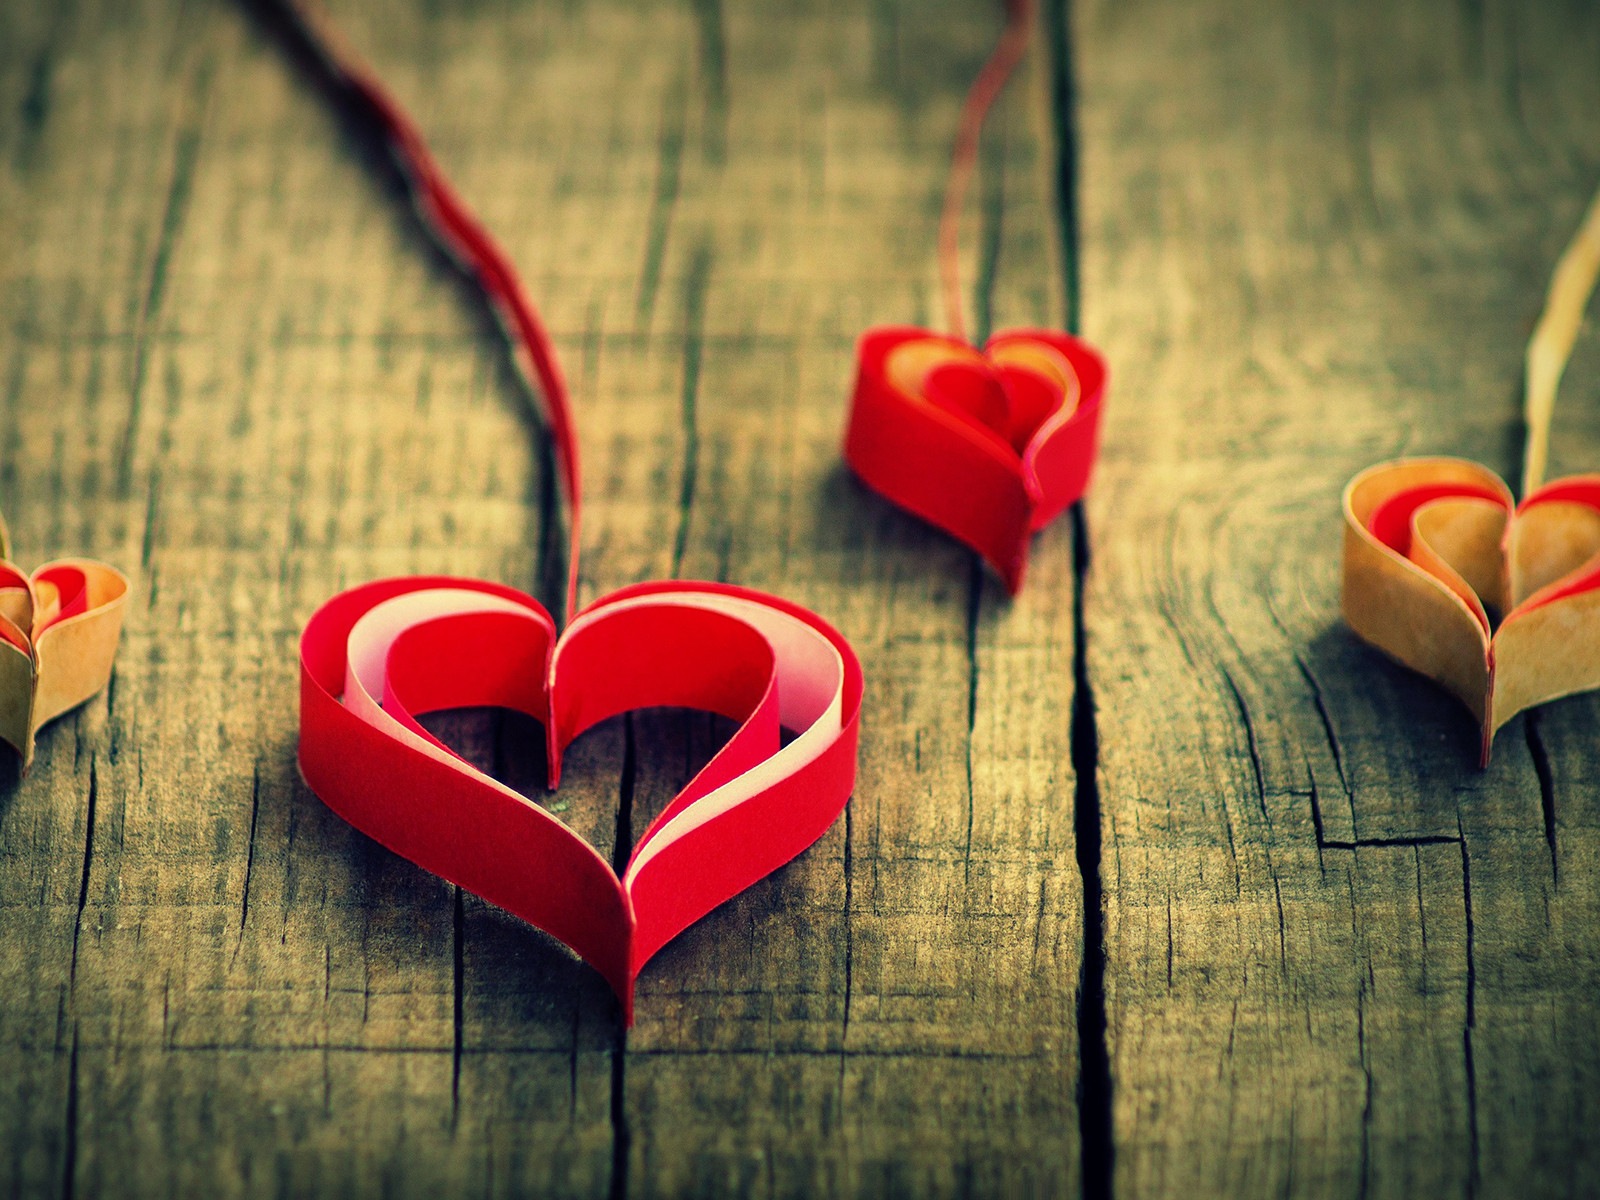 The theme of love, creative heart-shaped HD wallpapers #3 - 1600x1200